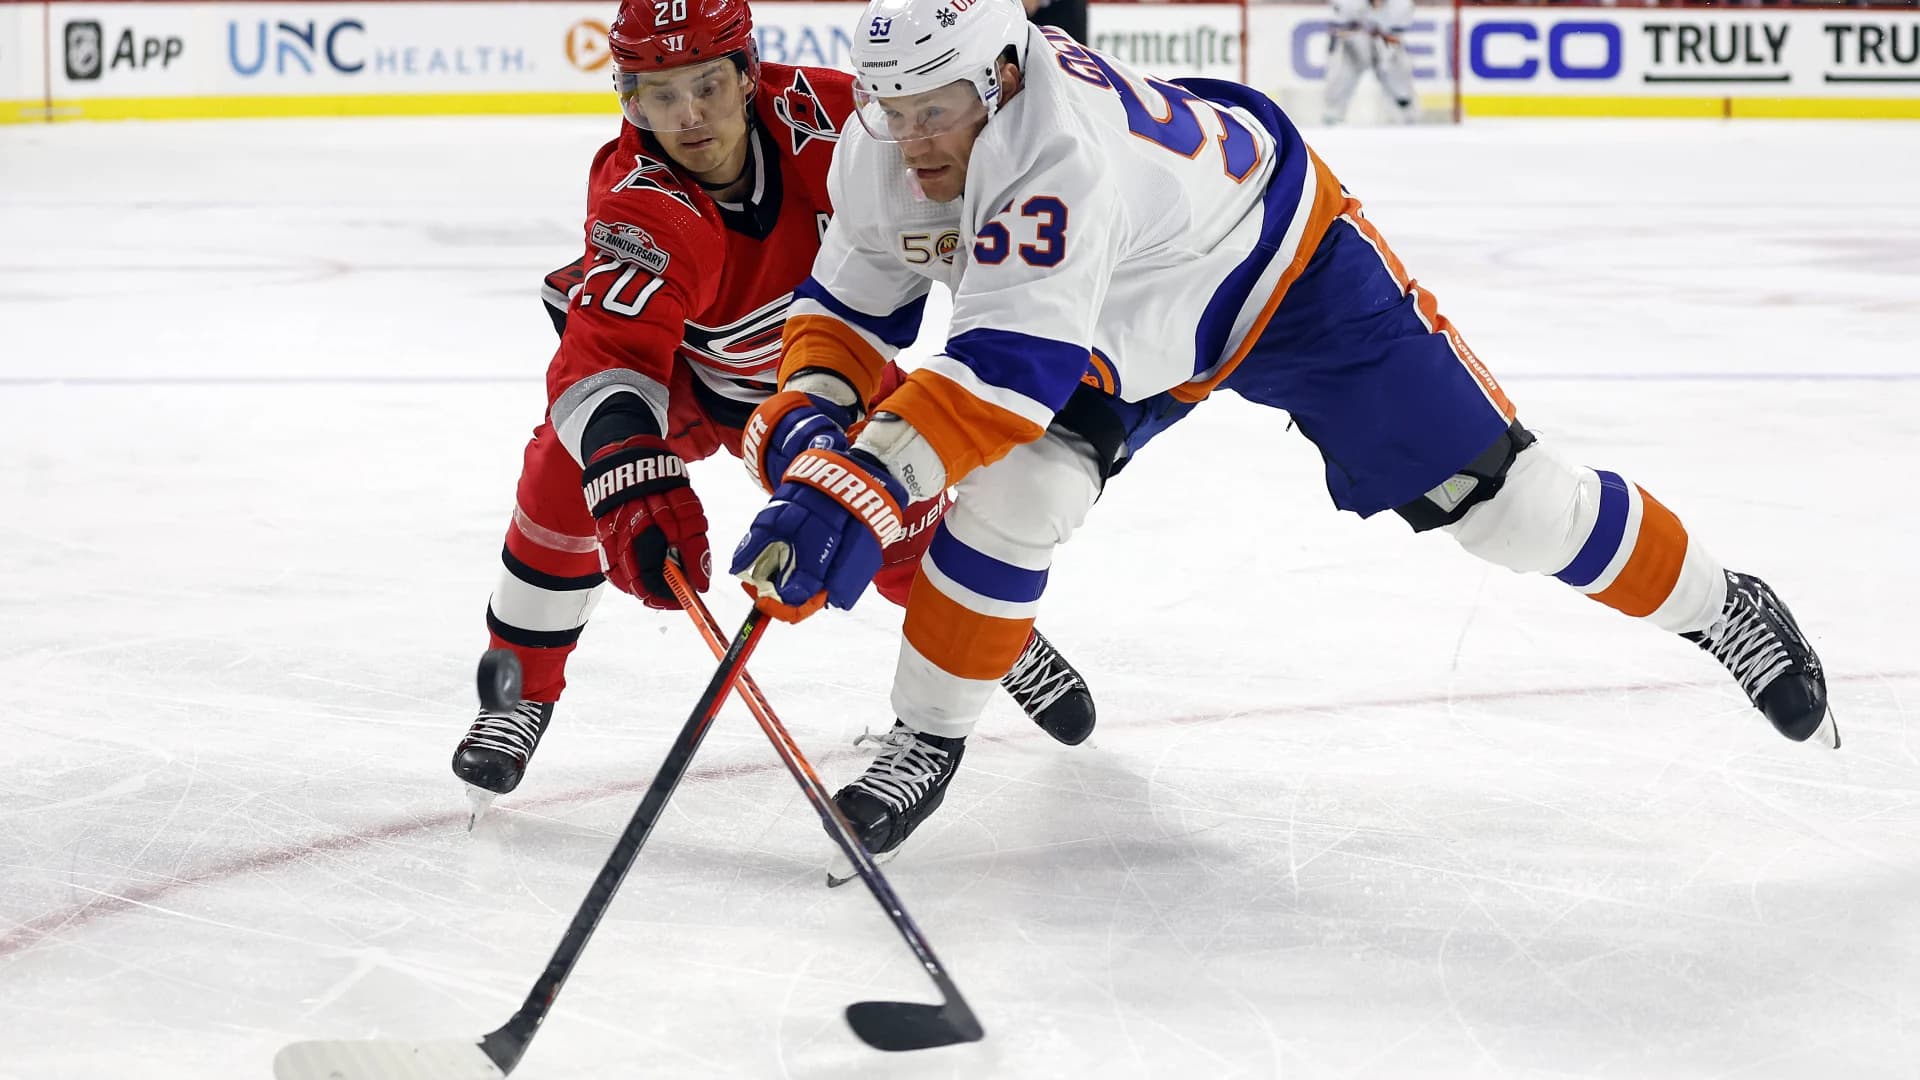 Fast's goal lifts Hurricanes past Islanders in overtime